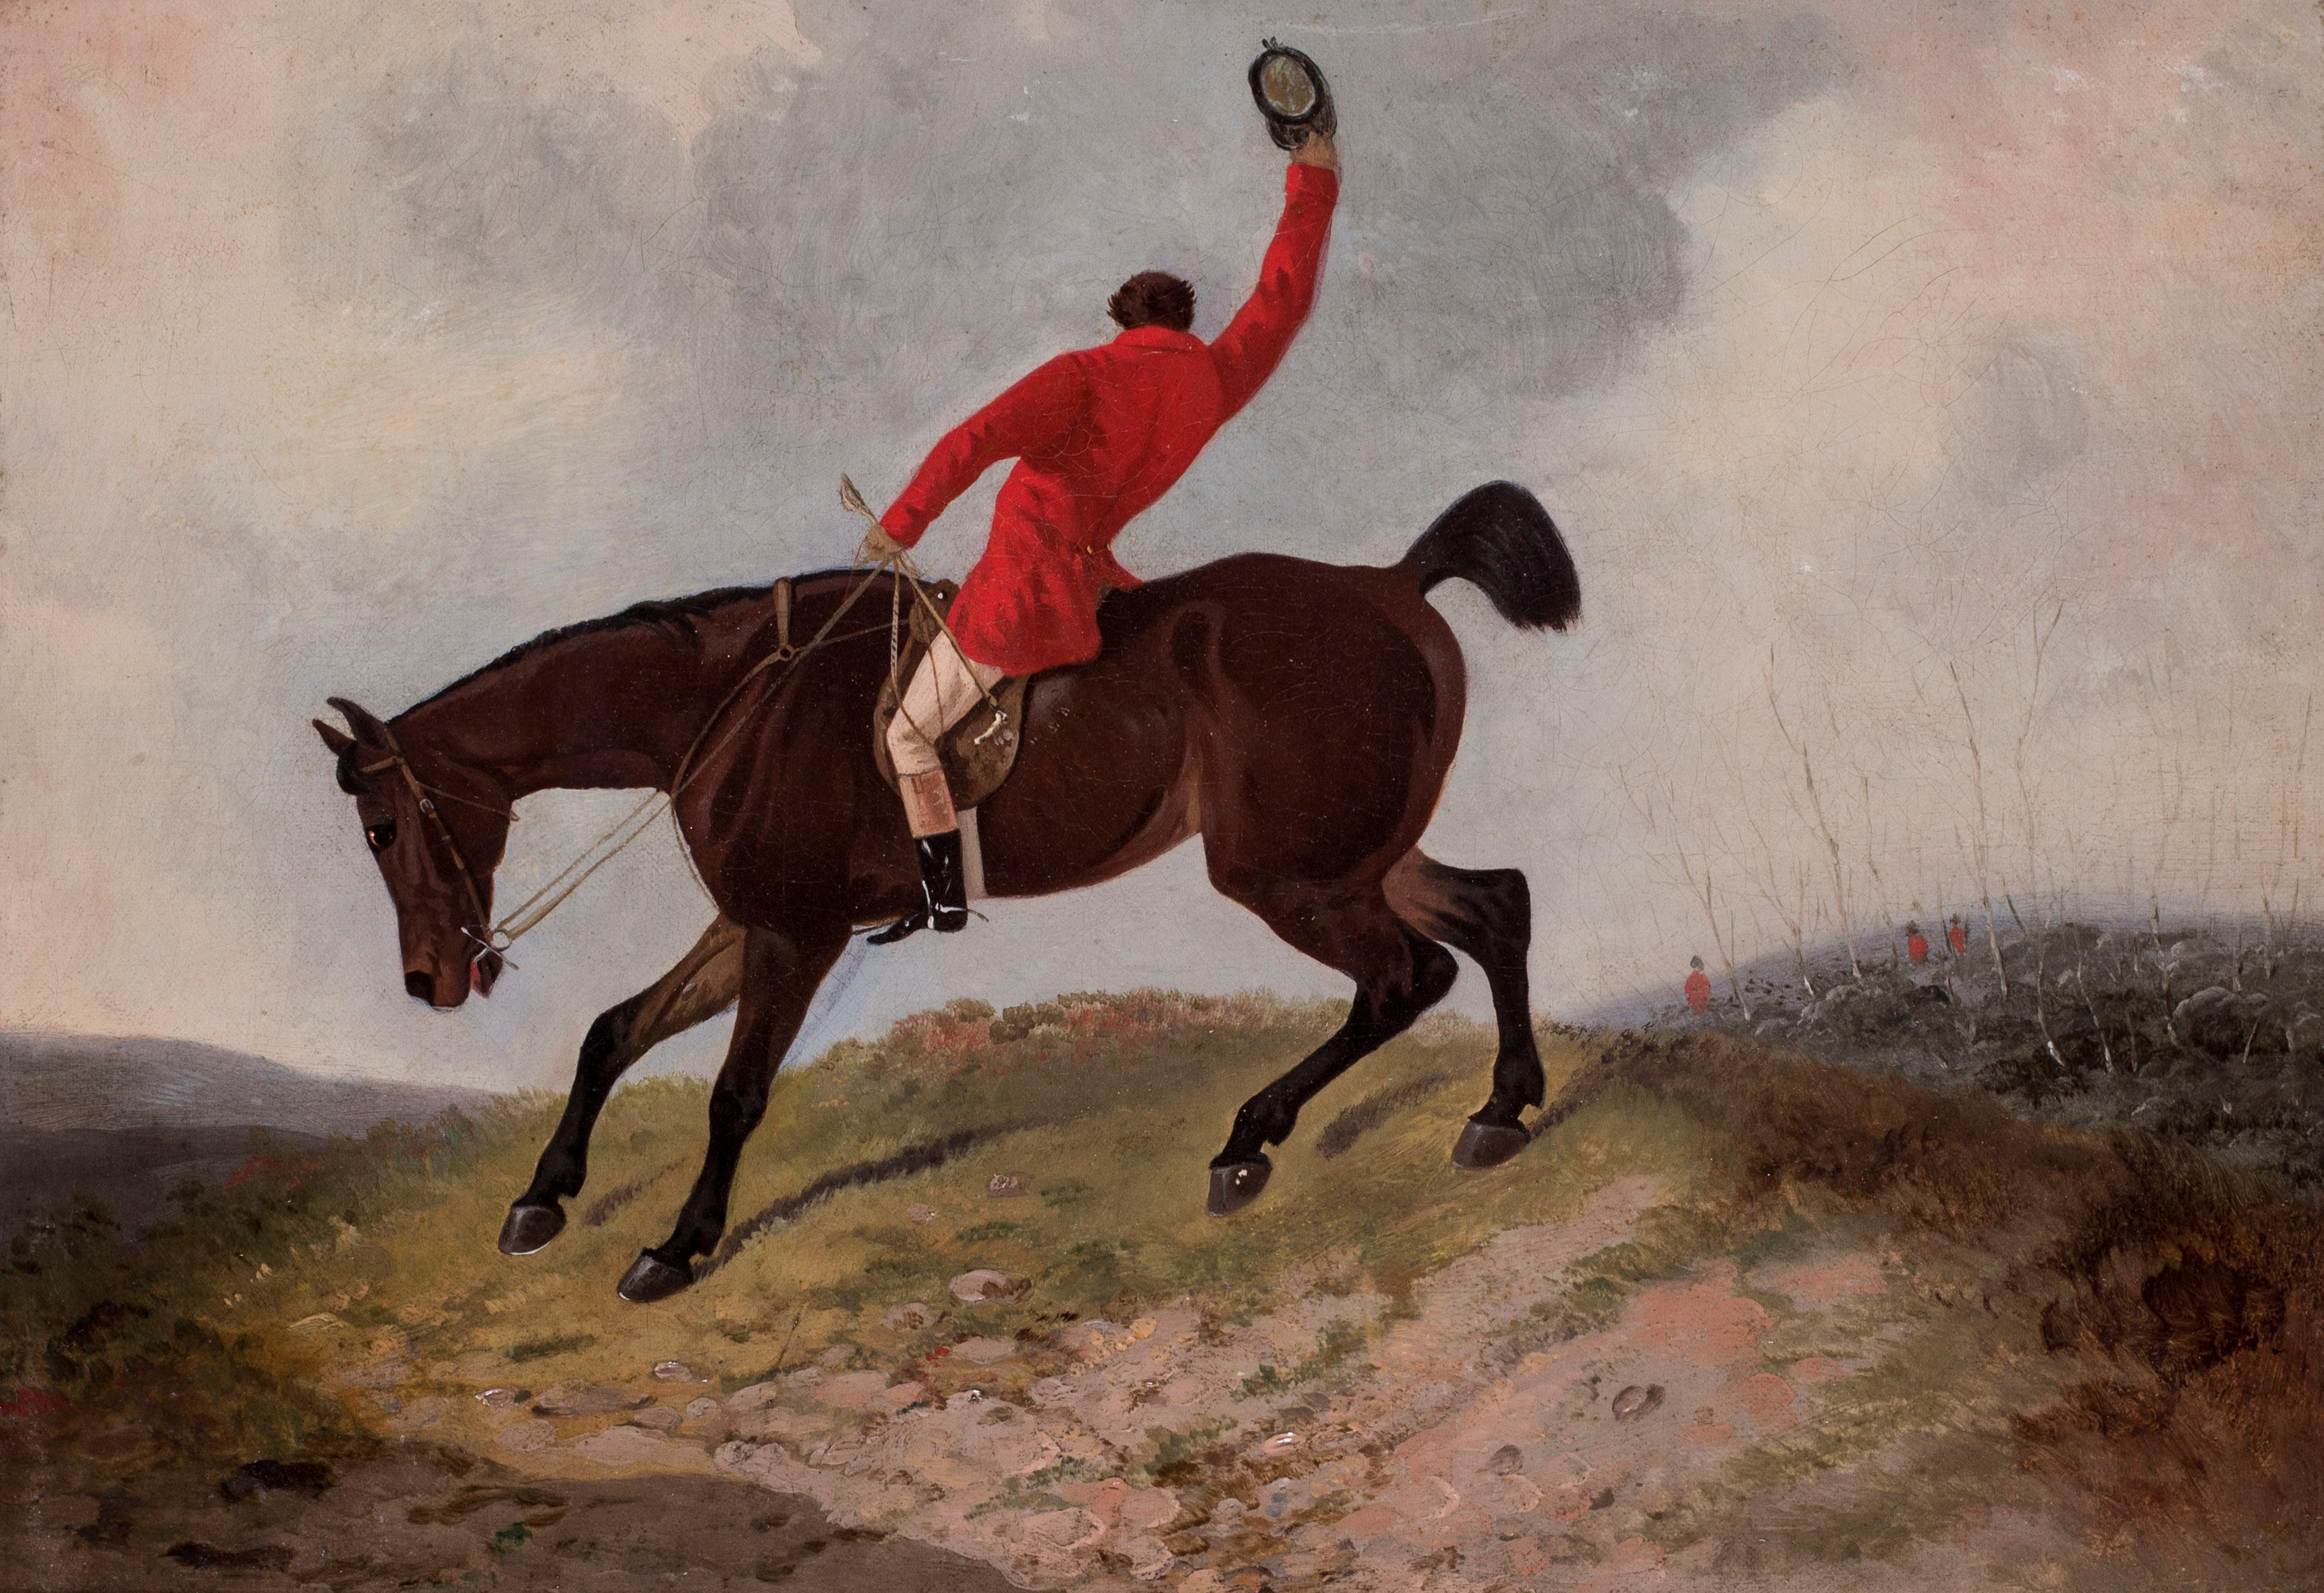 Tally ho - Painting by Unknown